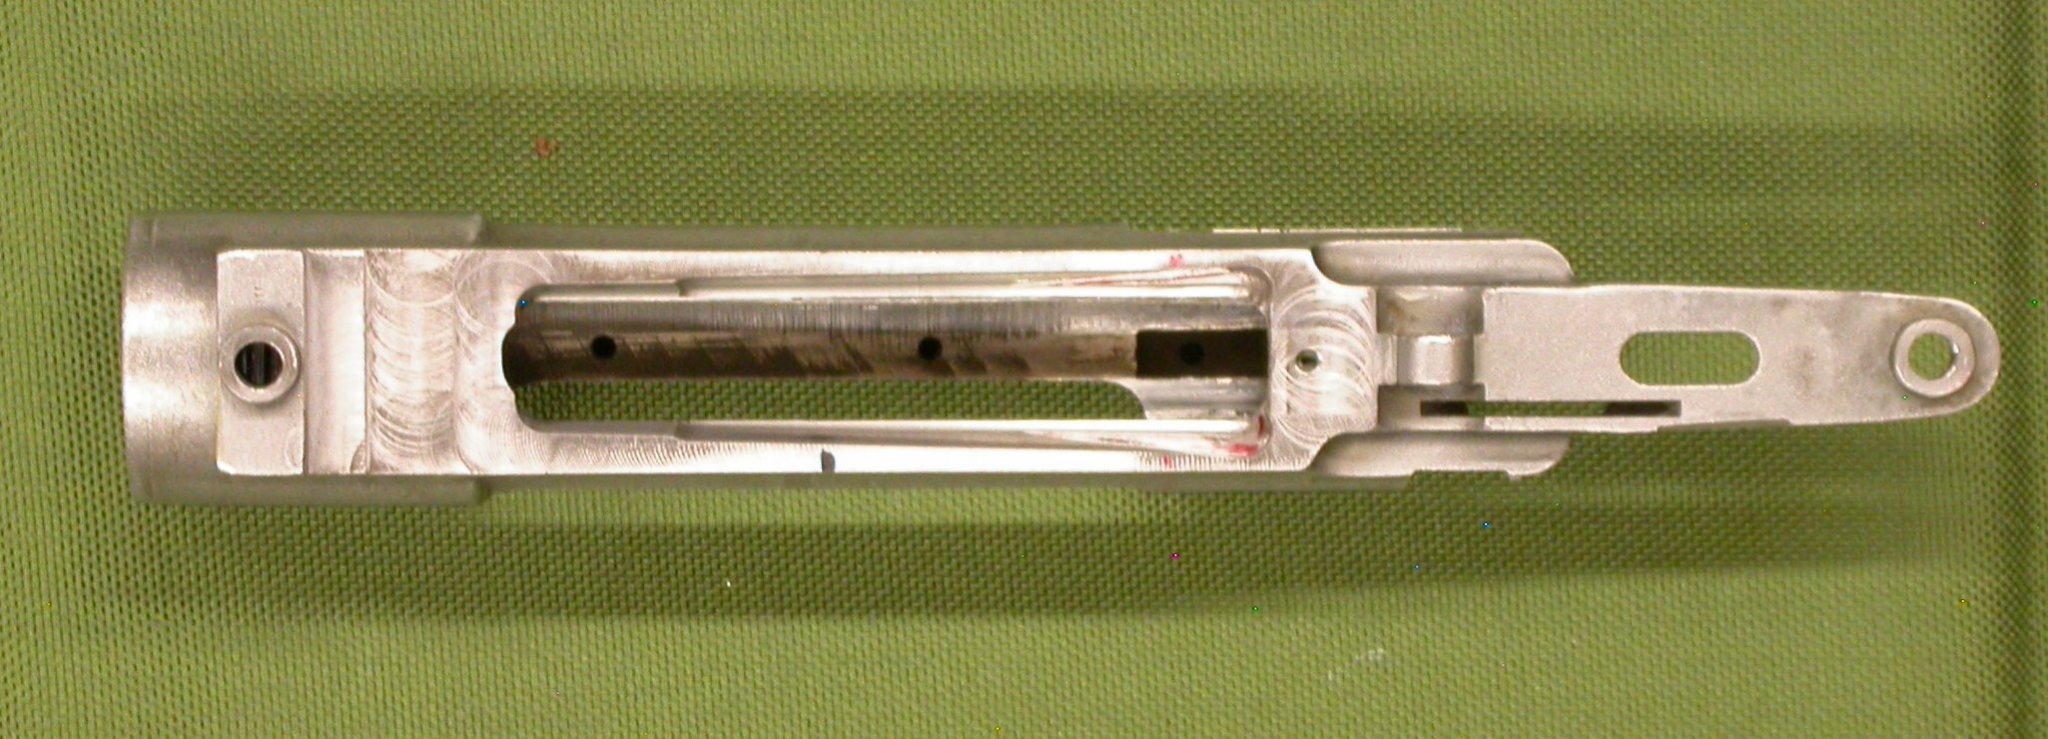 C3A1 receiver mag well.jpg